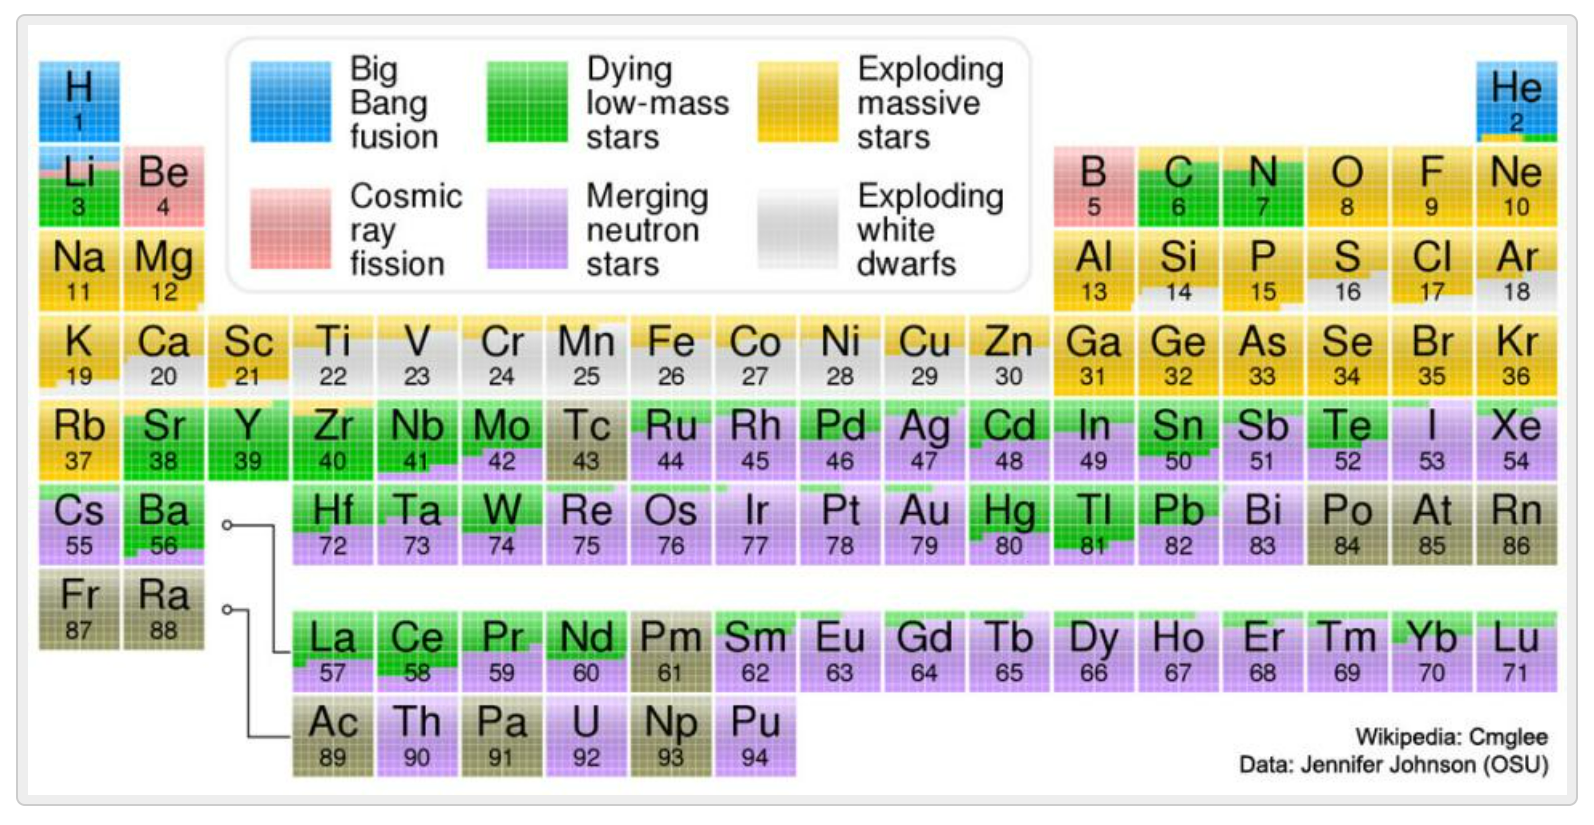 Where Elements Come From